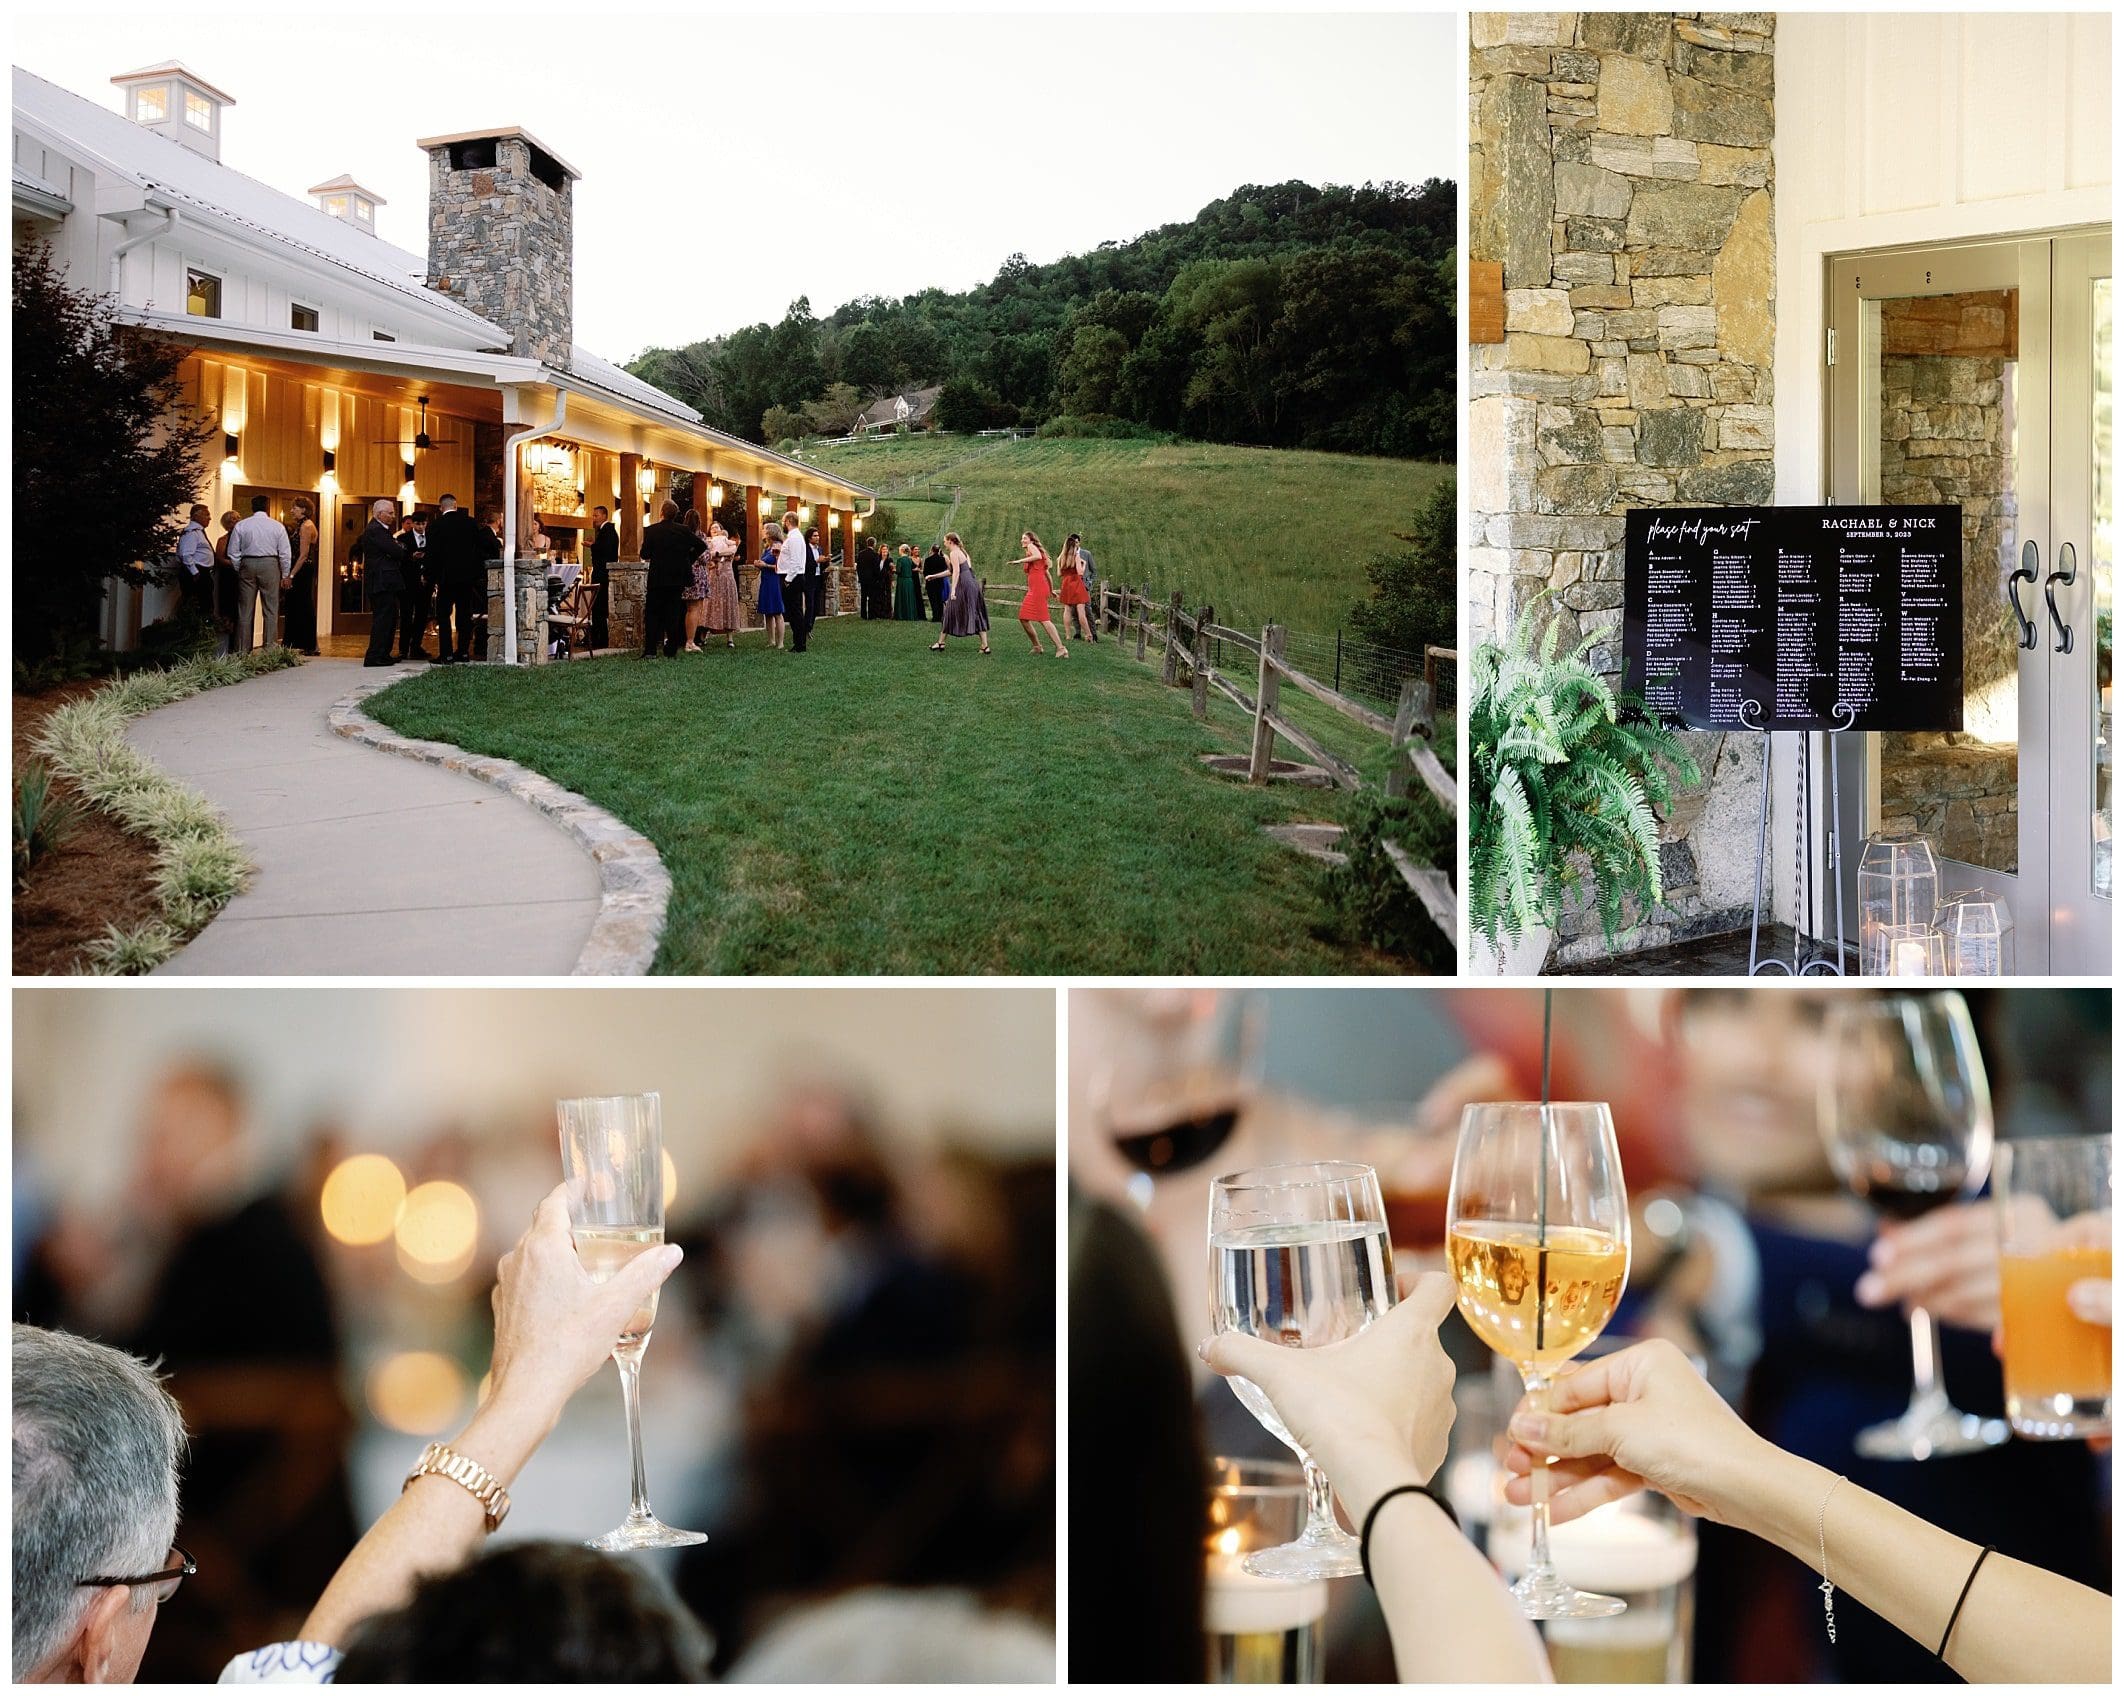 A collage of pictures of a wedding reception at a farm.